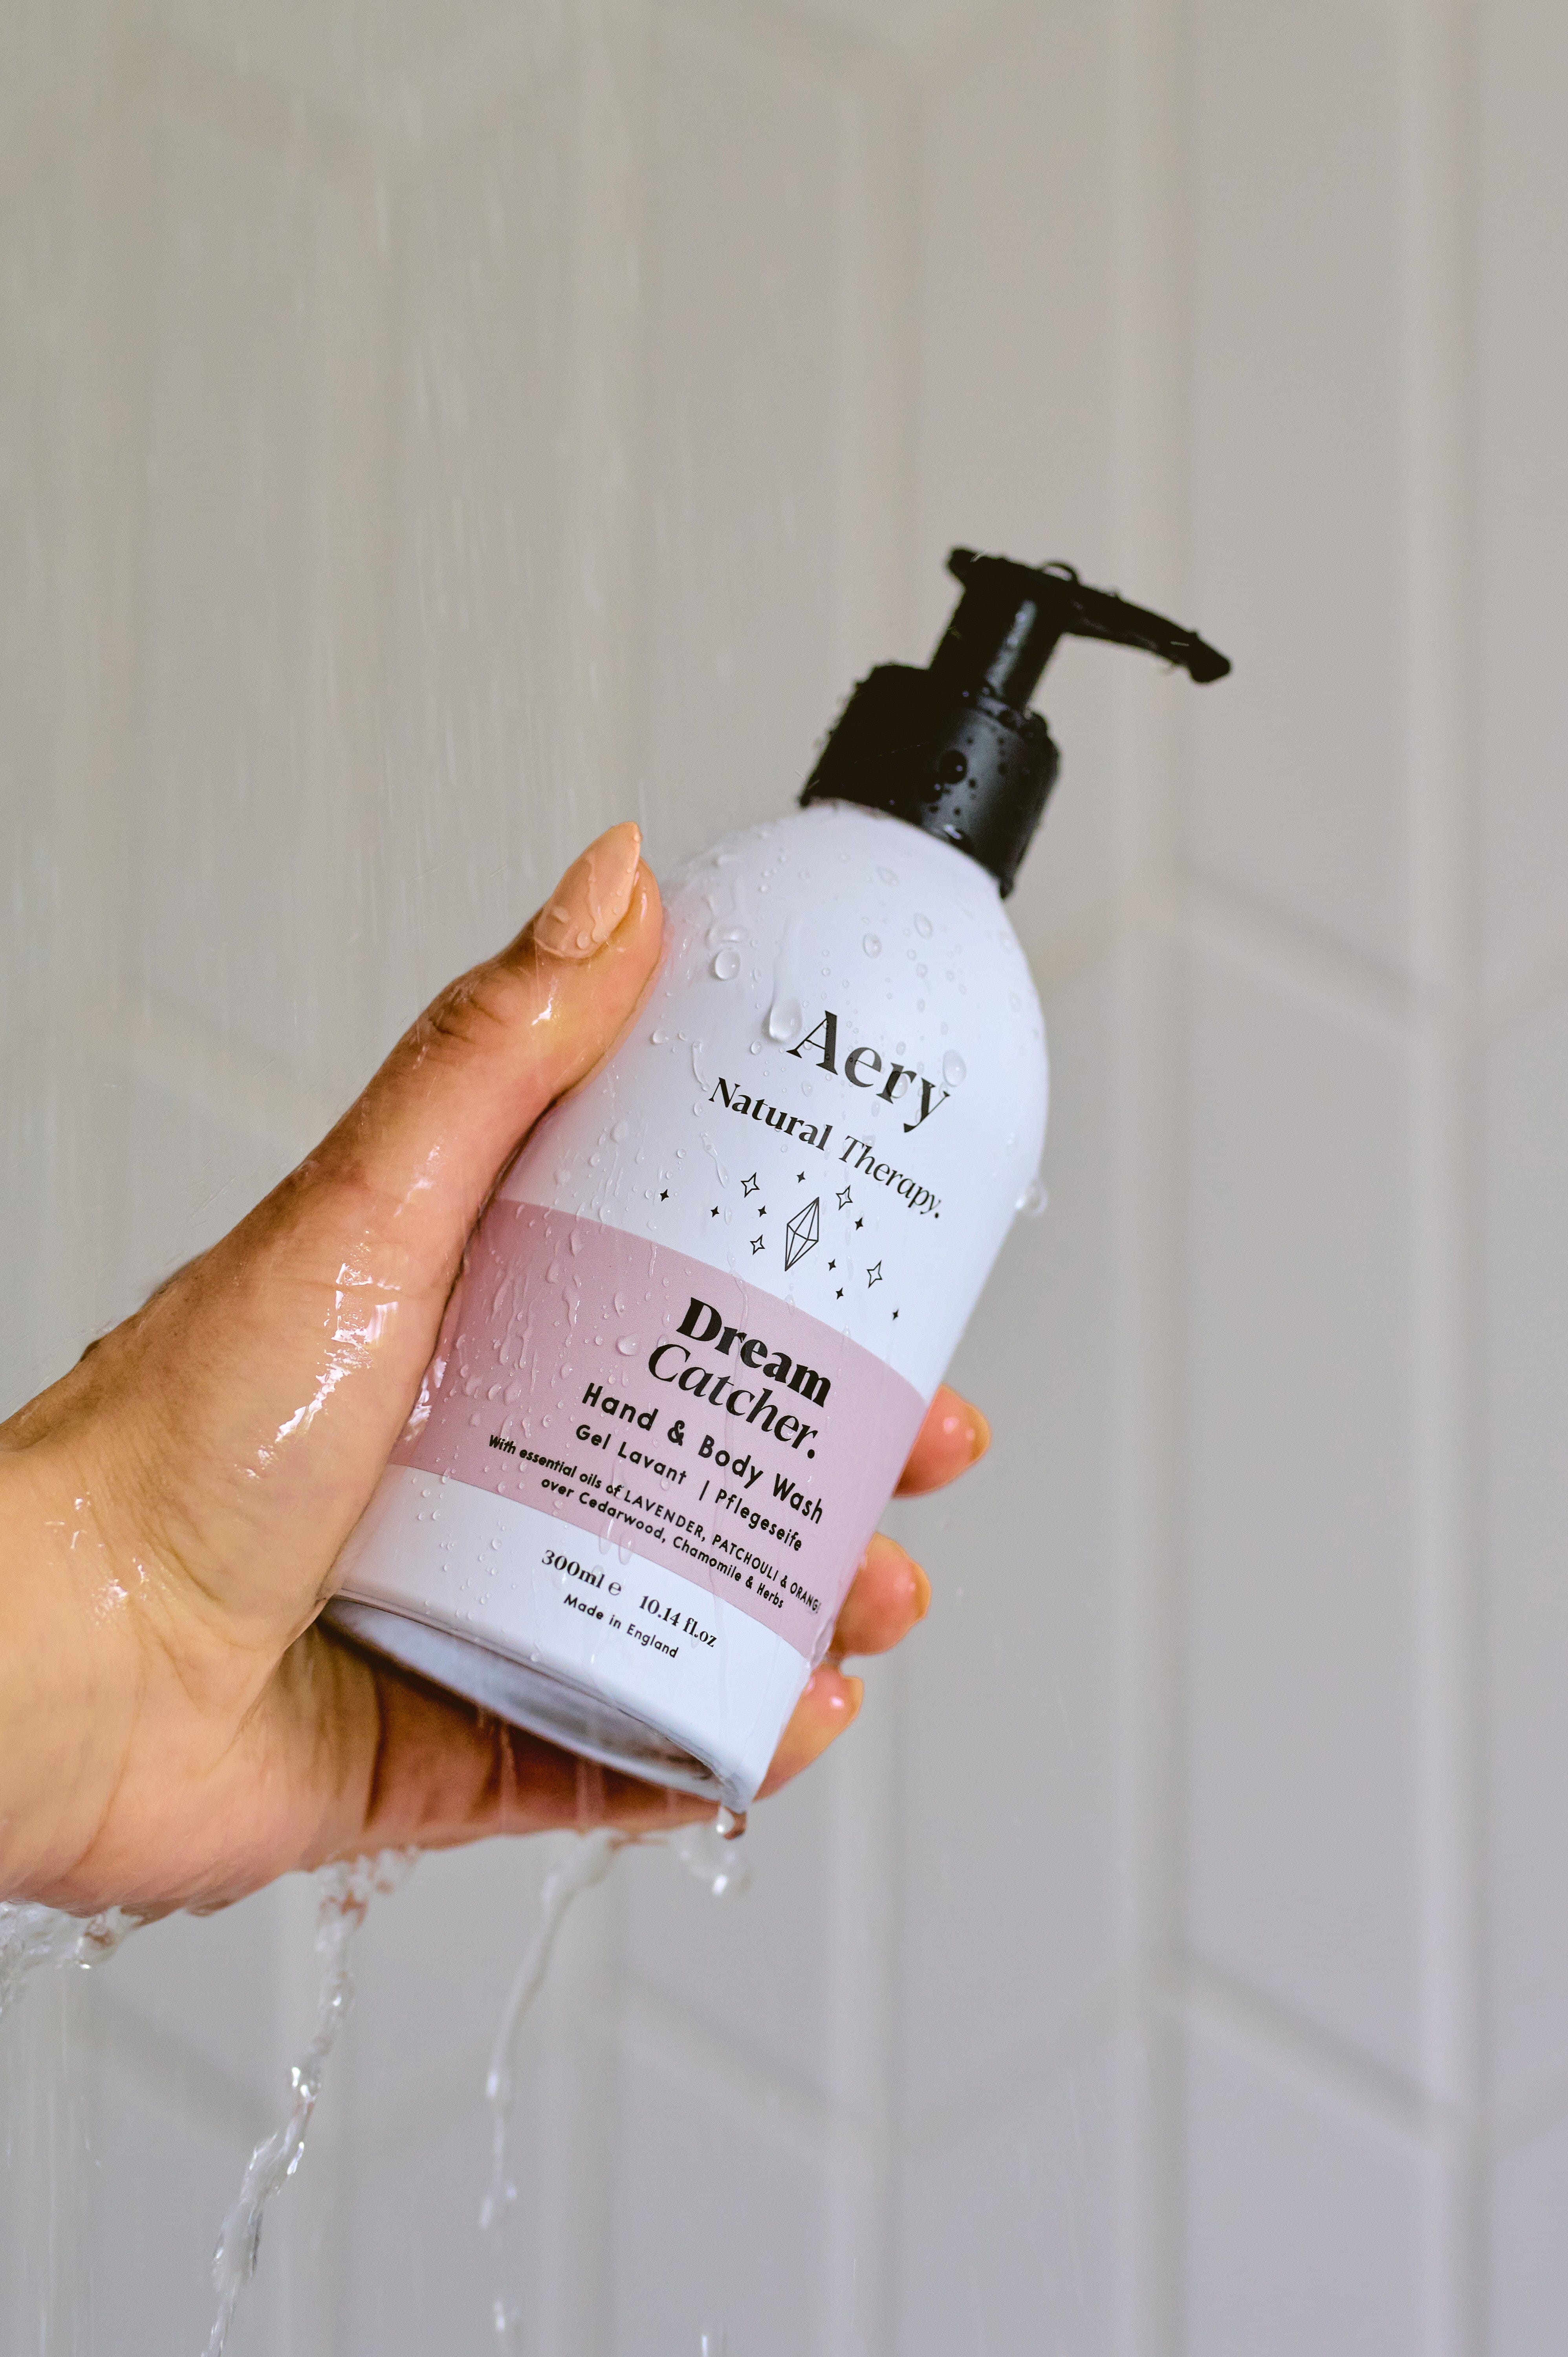 Lilac Dream Catcher hand wash by Aery displayed in hand in shower 